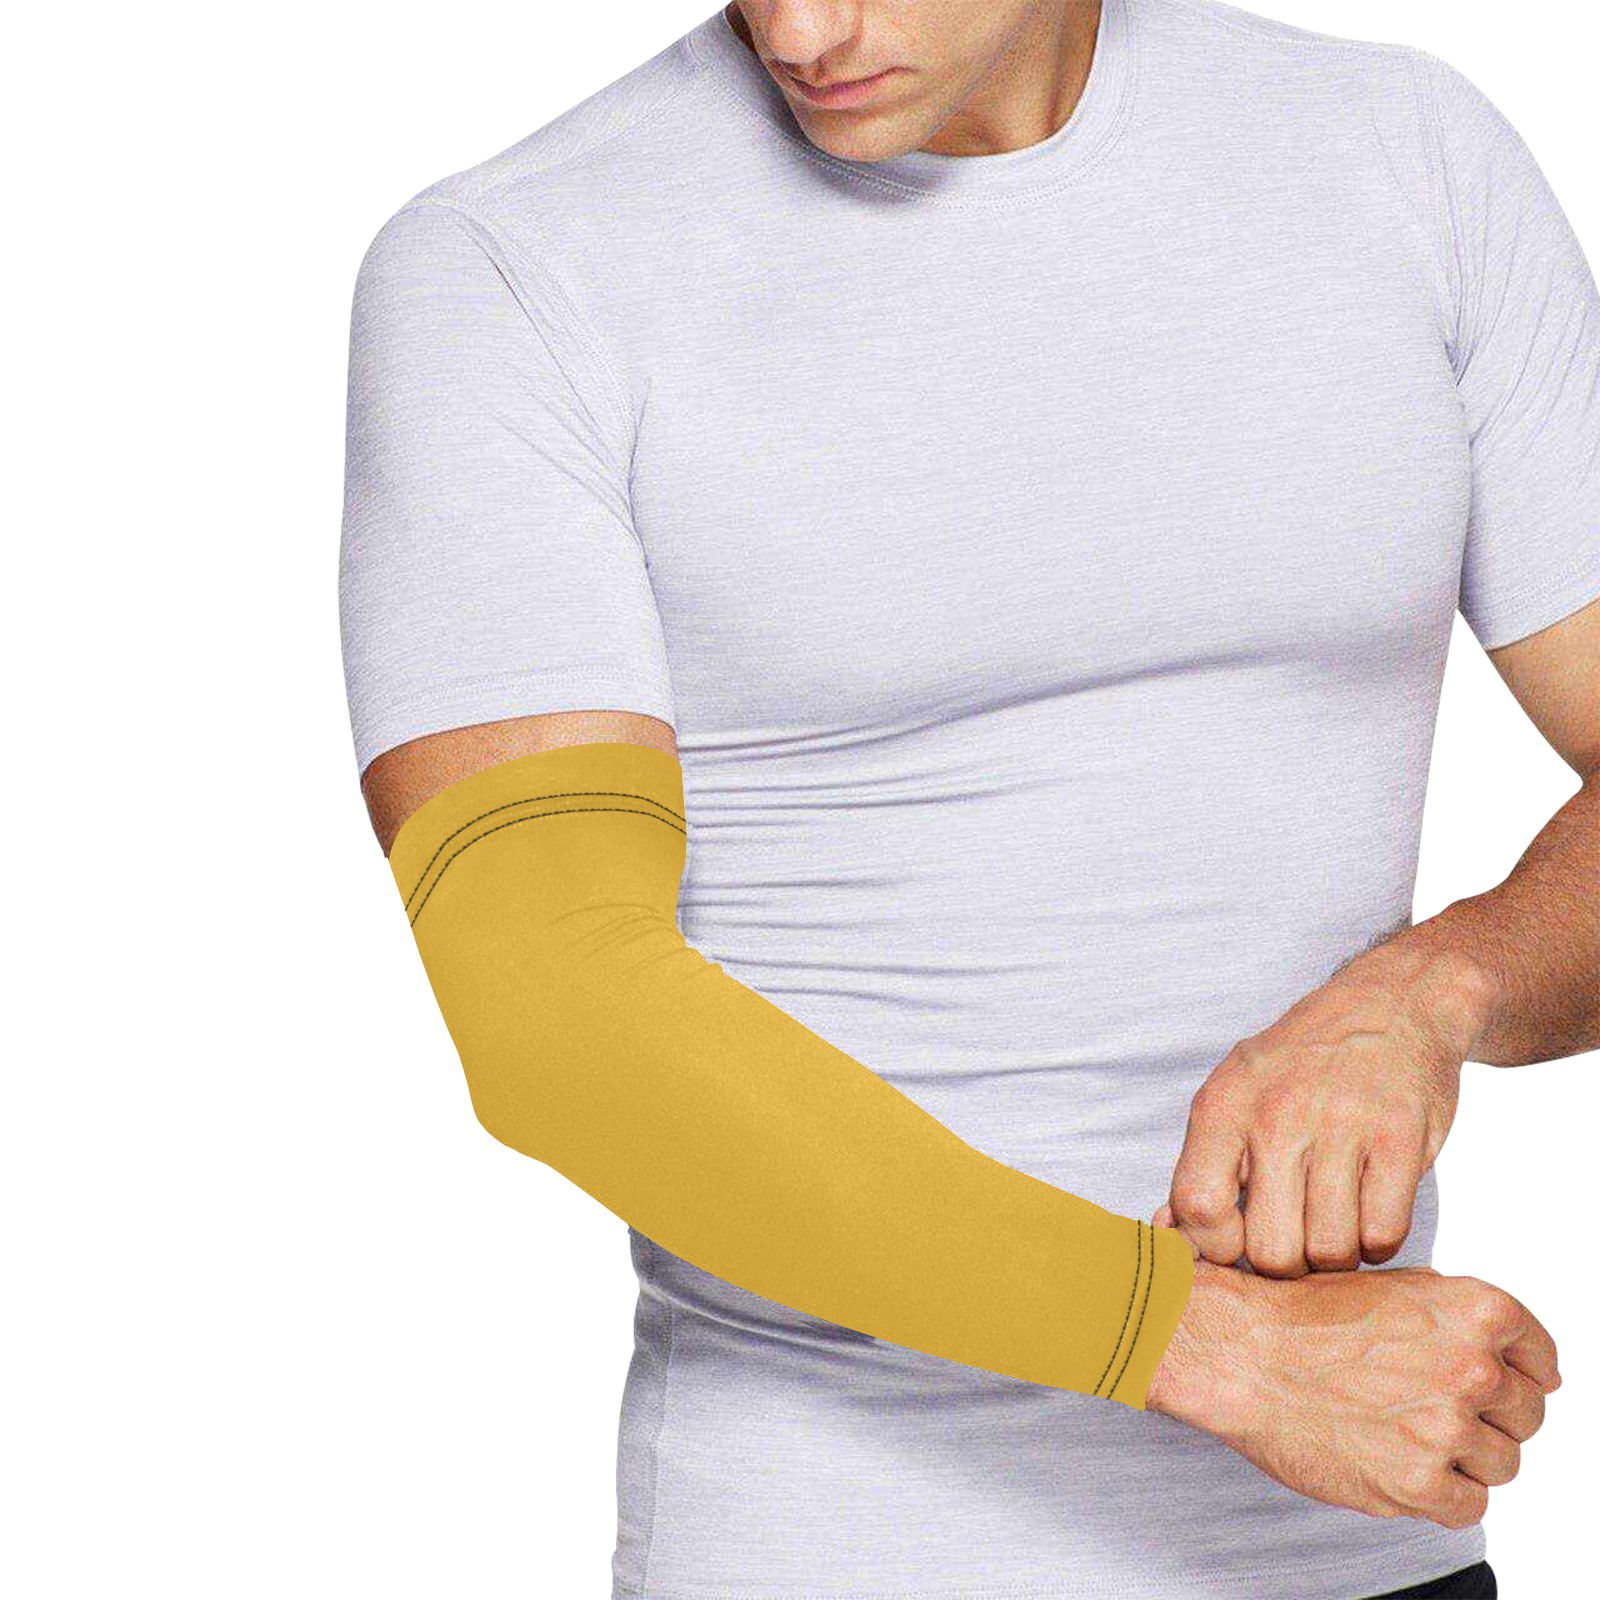 color goldenrod Arm Sleeves (Set of Two)